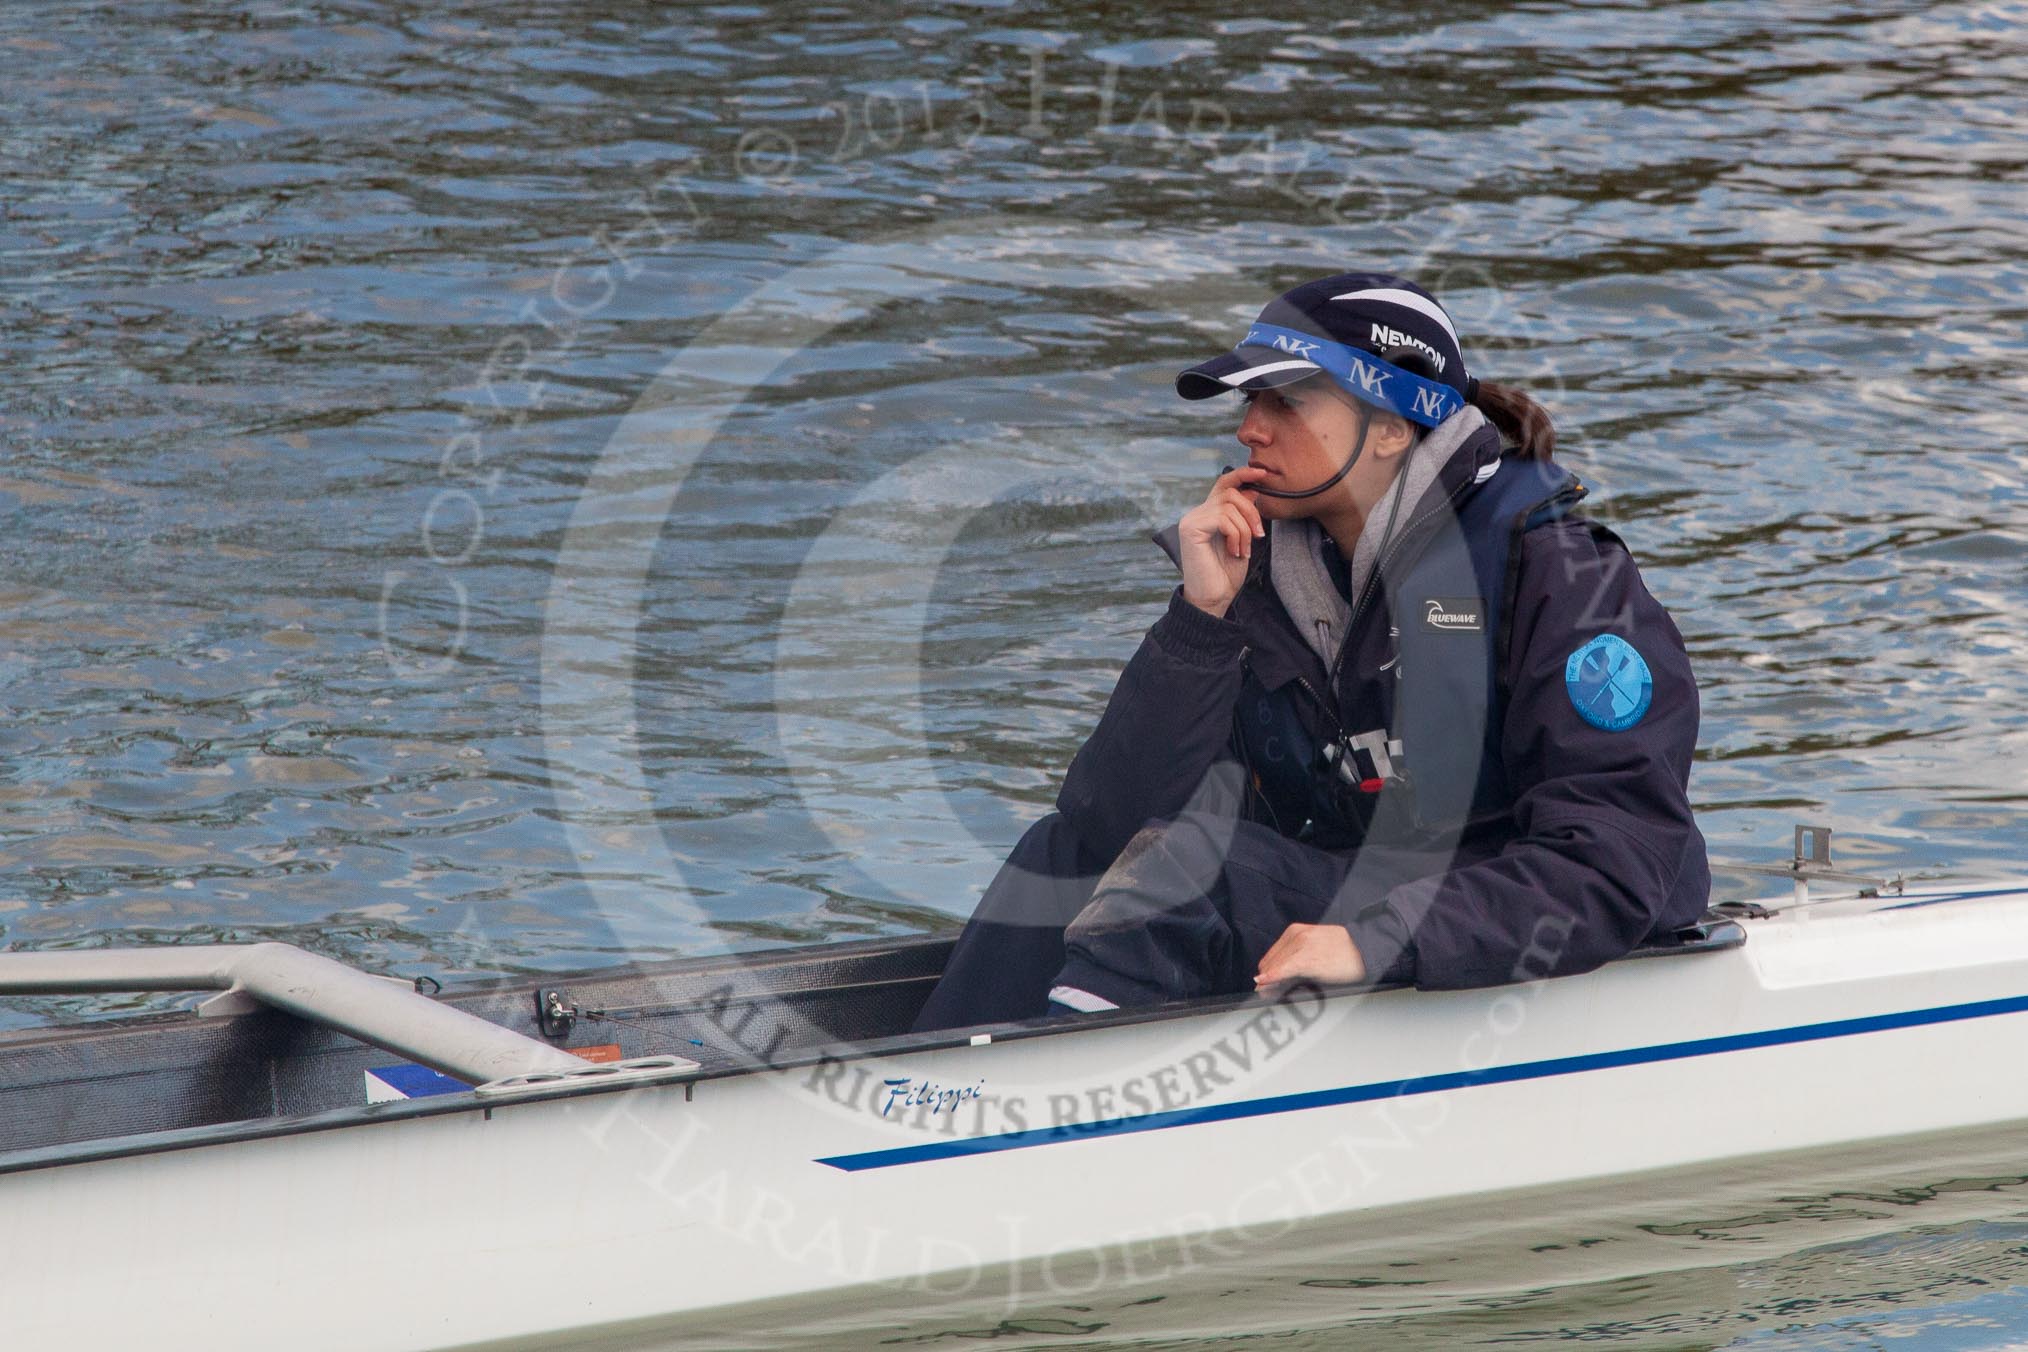 The Boat Race season 2013 - OUWBC training: In the OUWBC reserve boat  Osiris cox Sophie Shawdon..
Fleming Boathouse,
Wallingford,
Oxfordshire,
United Kingdom,
on 13 March 2013 at 16:53, image #34